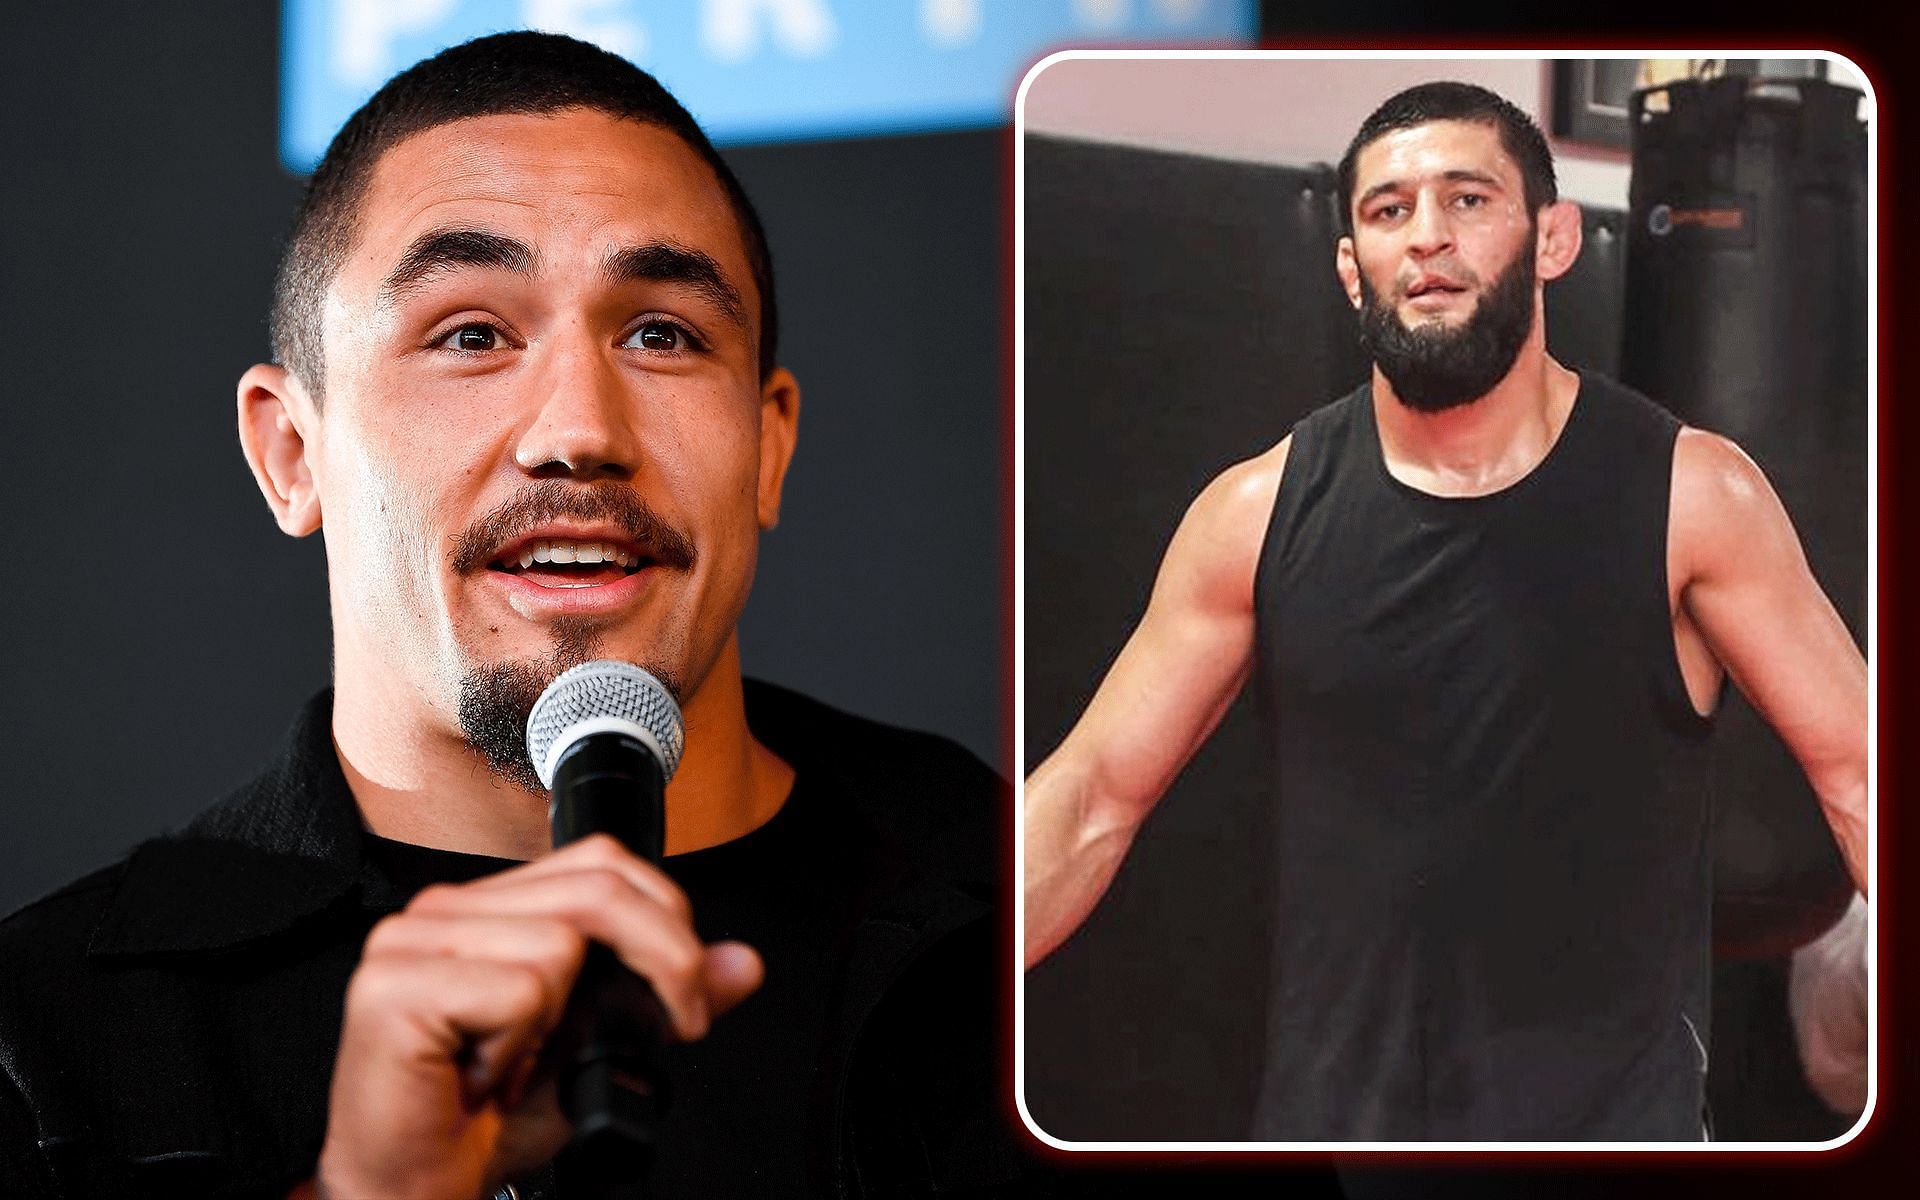 Robert Whittaker (left) reacts to question about Khamzat Chimaev (right) [Images courtesy: Getty and @khamzat_chimaev on Instagram]